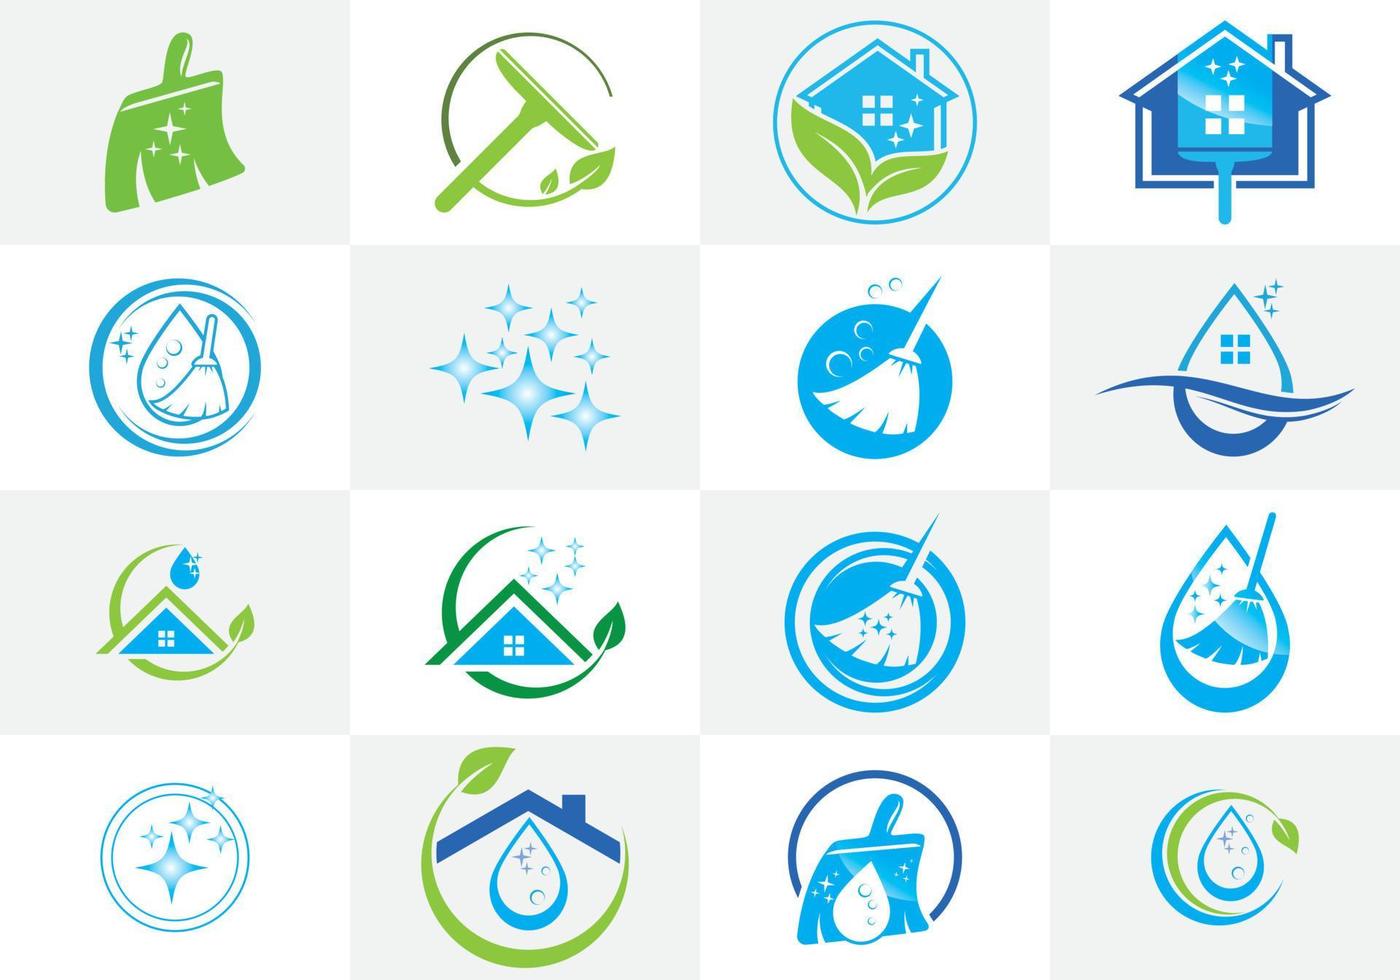 Cleaning Service Business logo design. Vector Icon Set